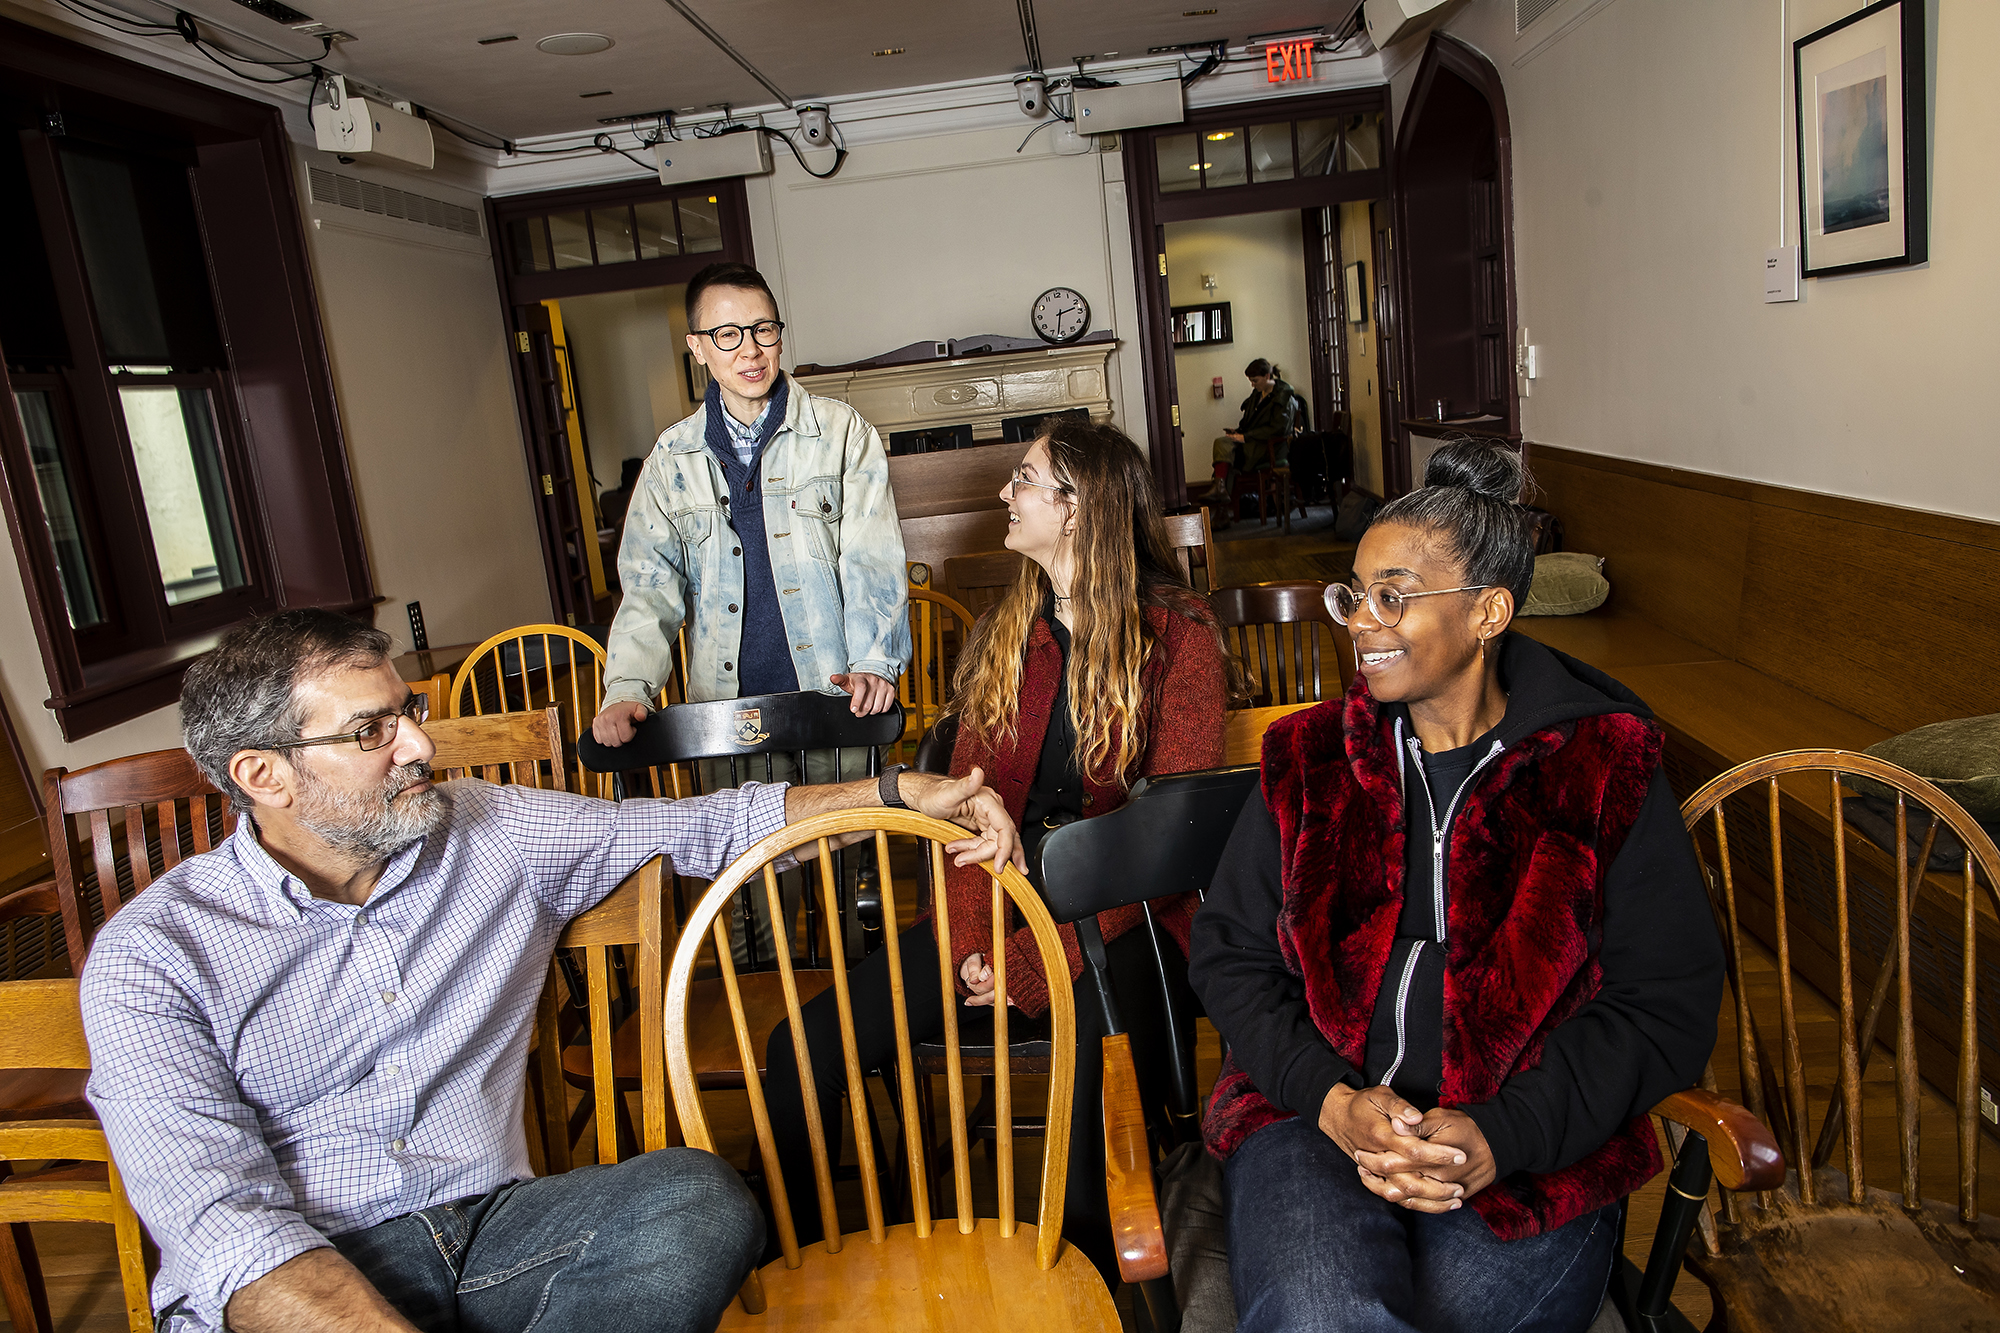 Al Filreis, Davy Knittle, Sophia DuRose and Simone White in a room at the Kelly Writers House.